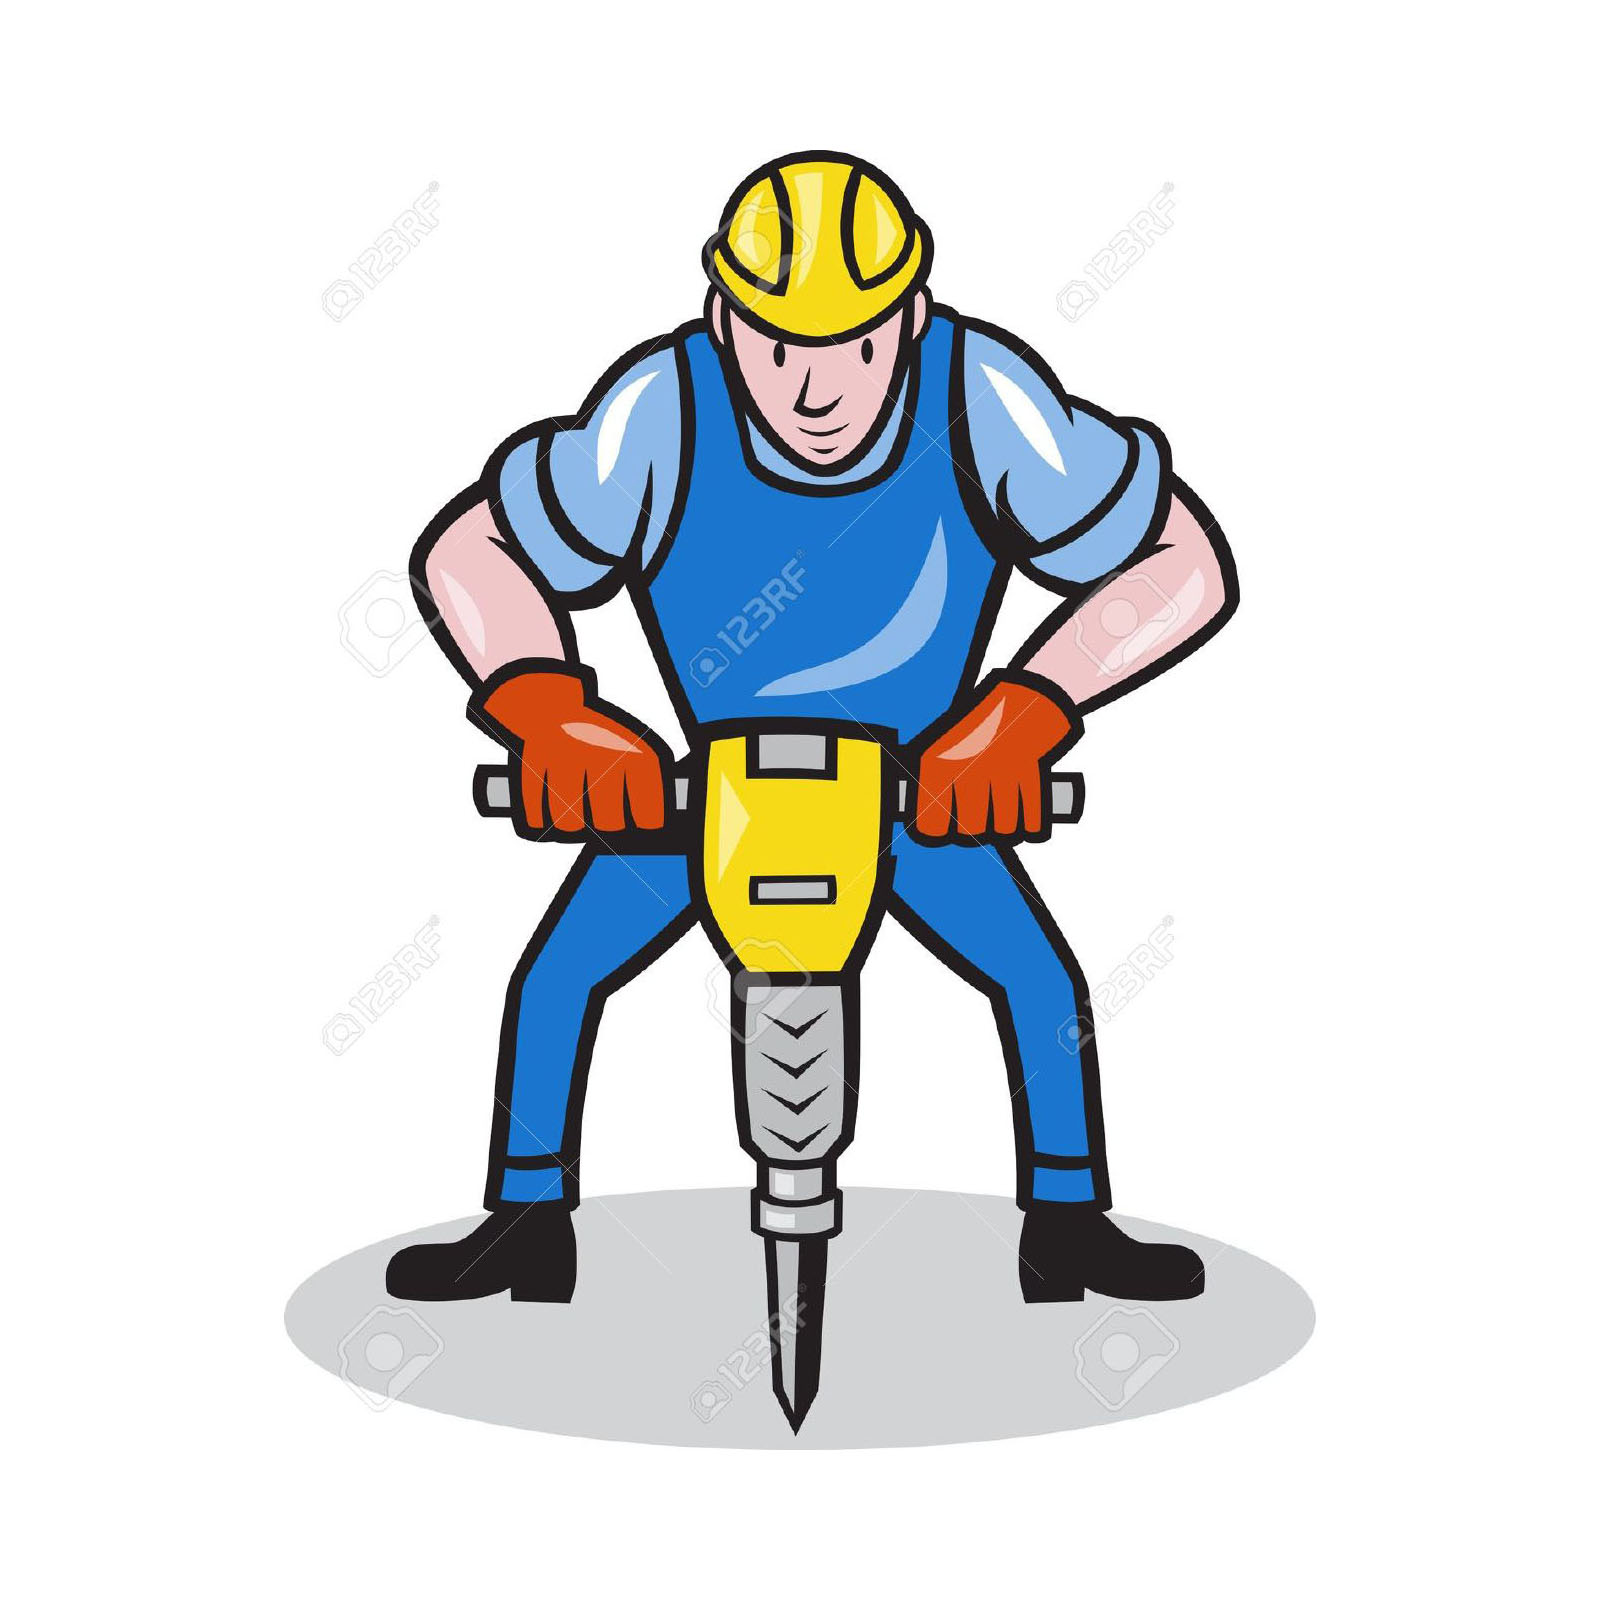 The image displays a jackhammer to show using a jackhammer and visioning a seagull soaring at the same time is impossible.